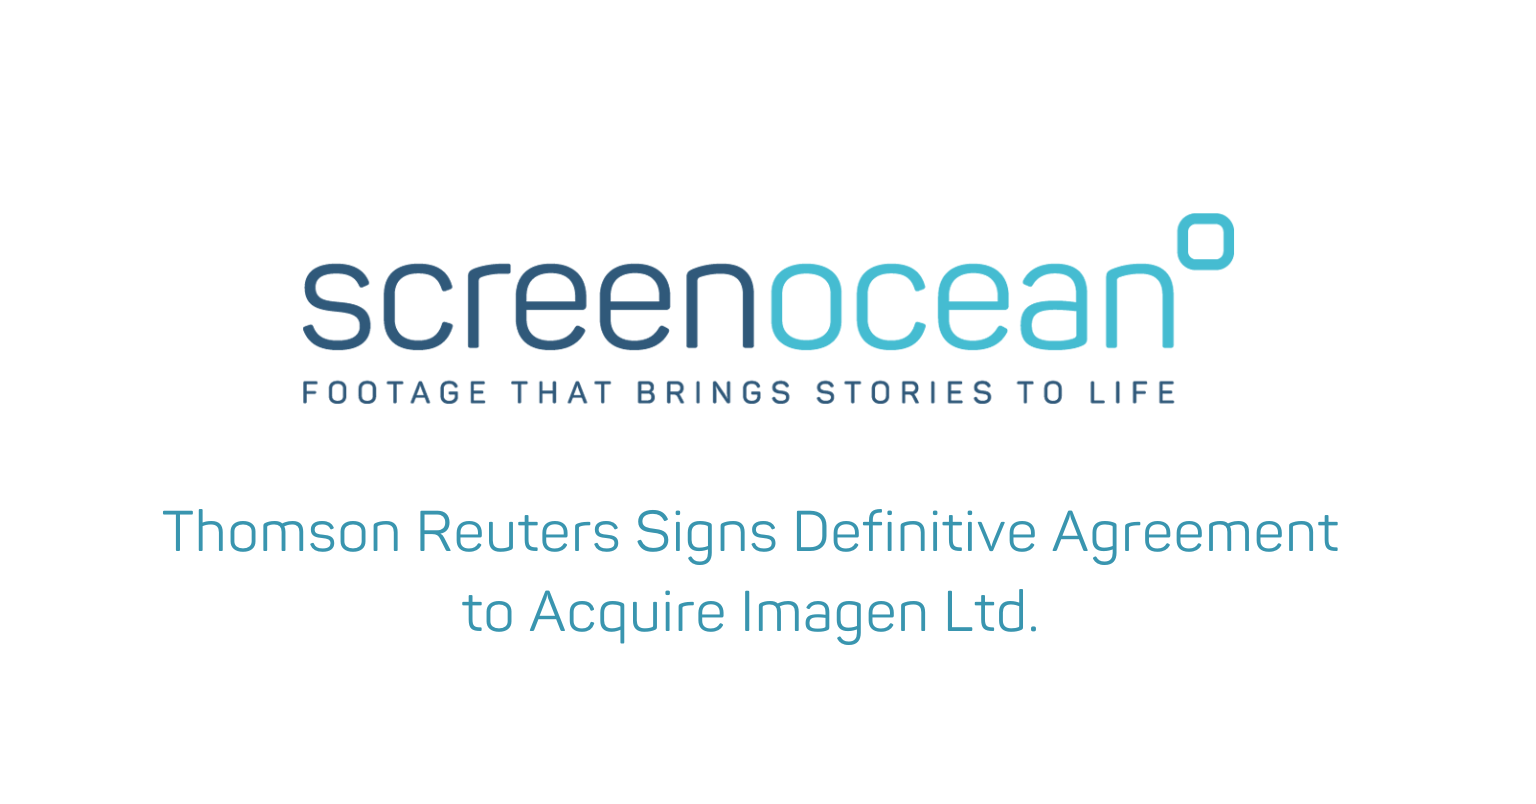 NEWS: THOMSON REUTERS SIGNS DEFINITIVE AGREEMENT TO ACQUIRE IMAGEN LTD